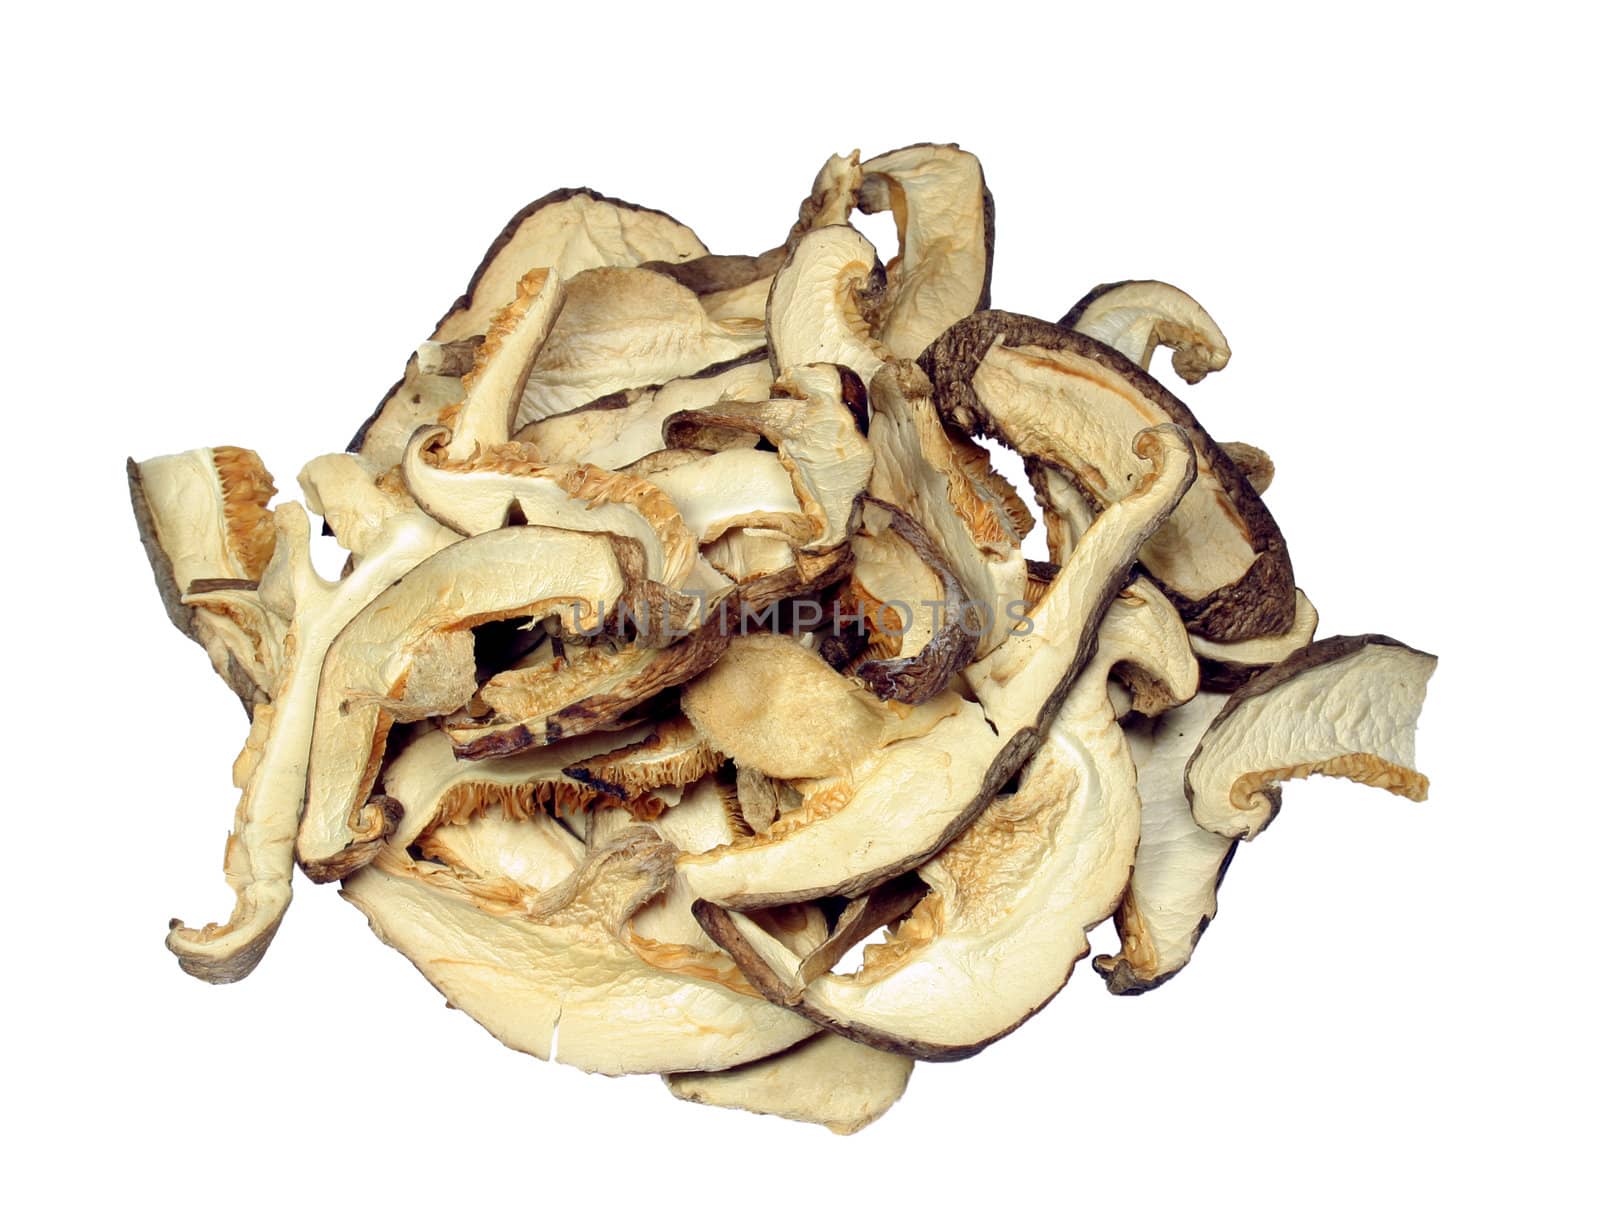 Dried sliced Shiitake mushrooms, fully isolated on white.